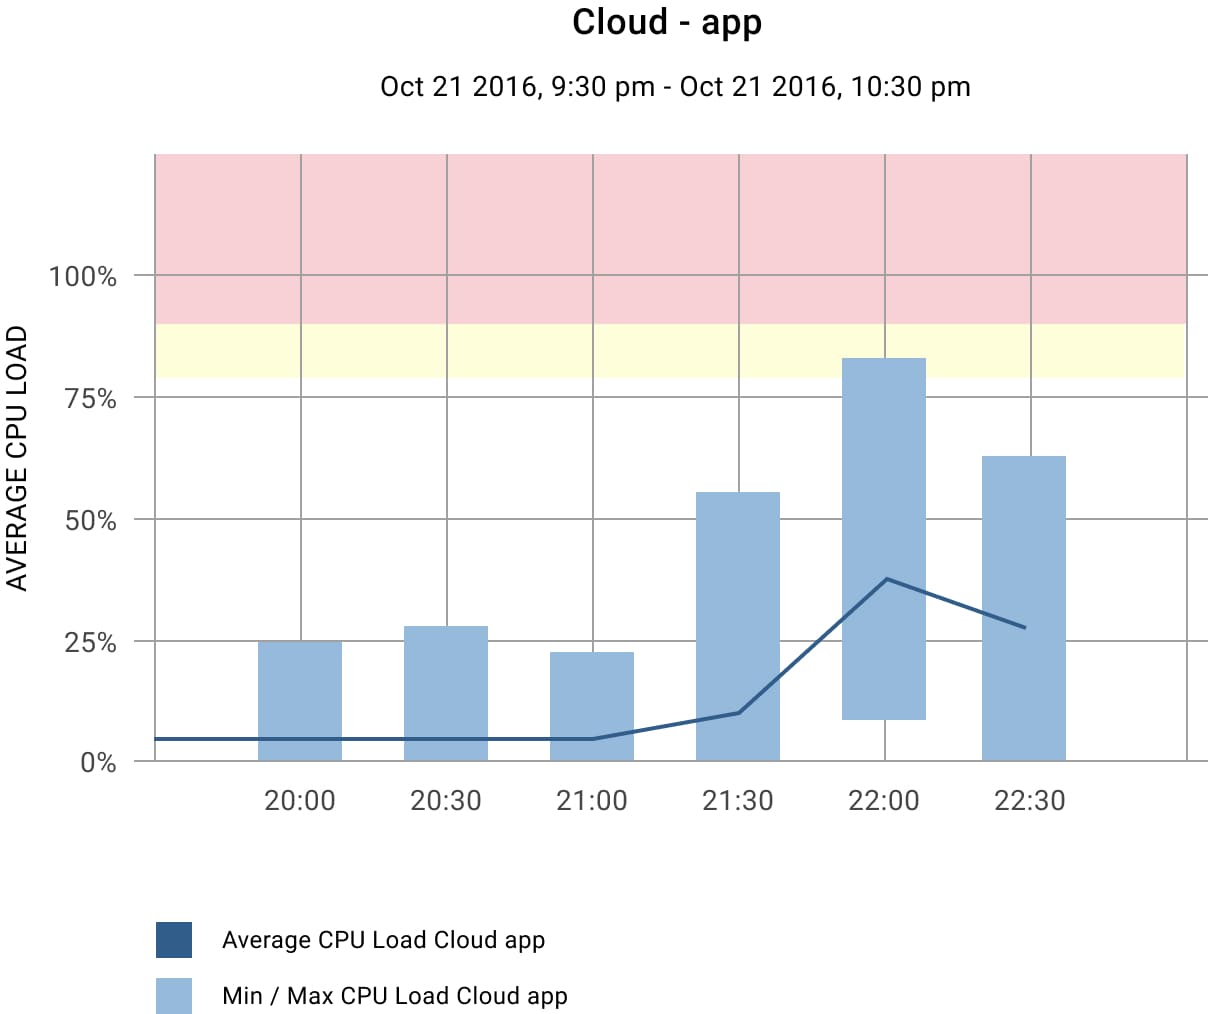 Demo project on monitoring system Cloud app